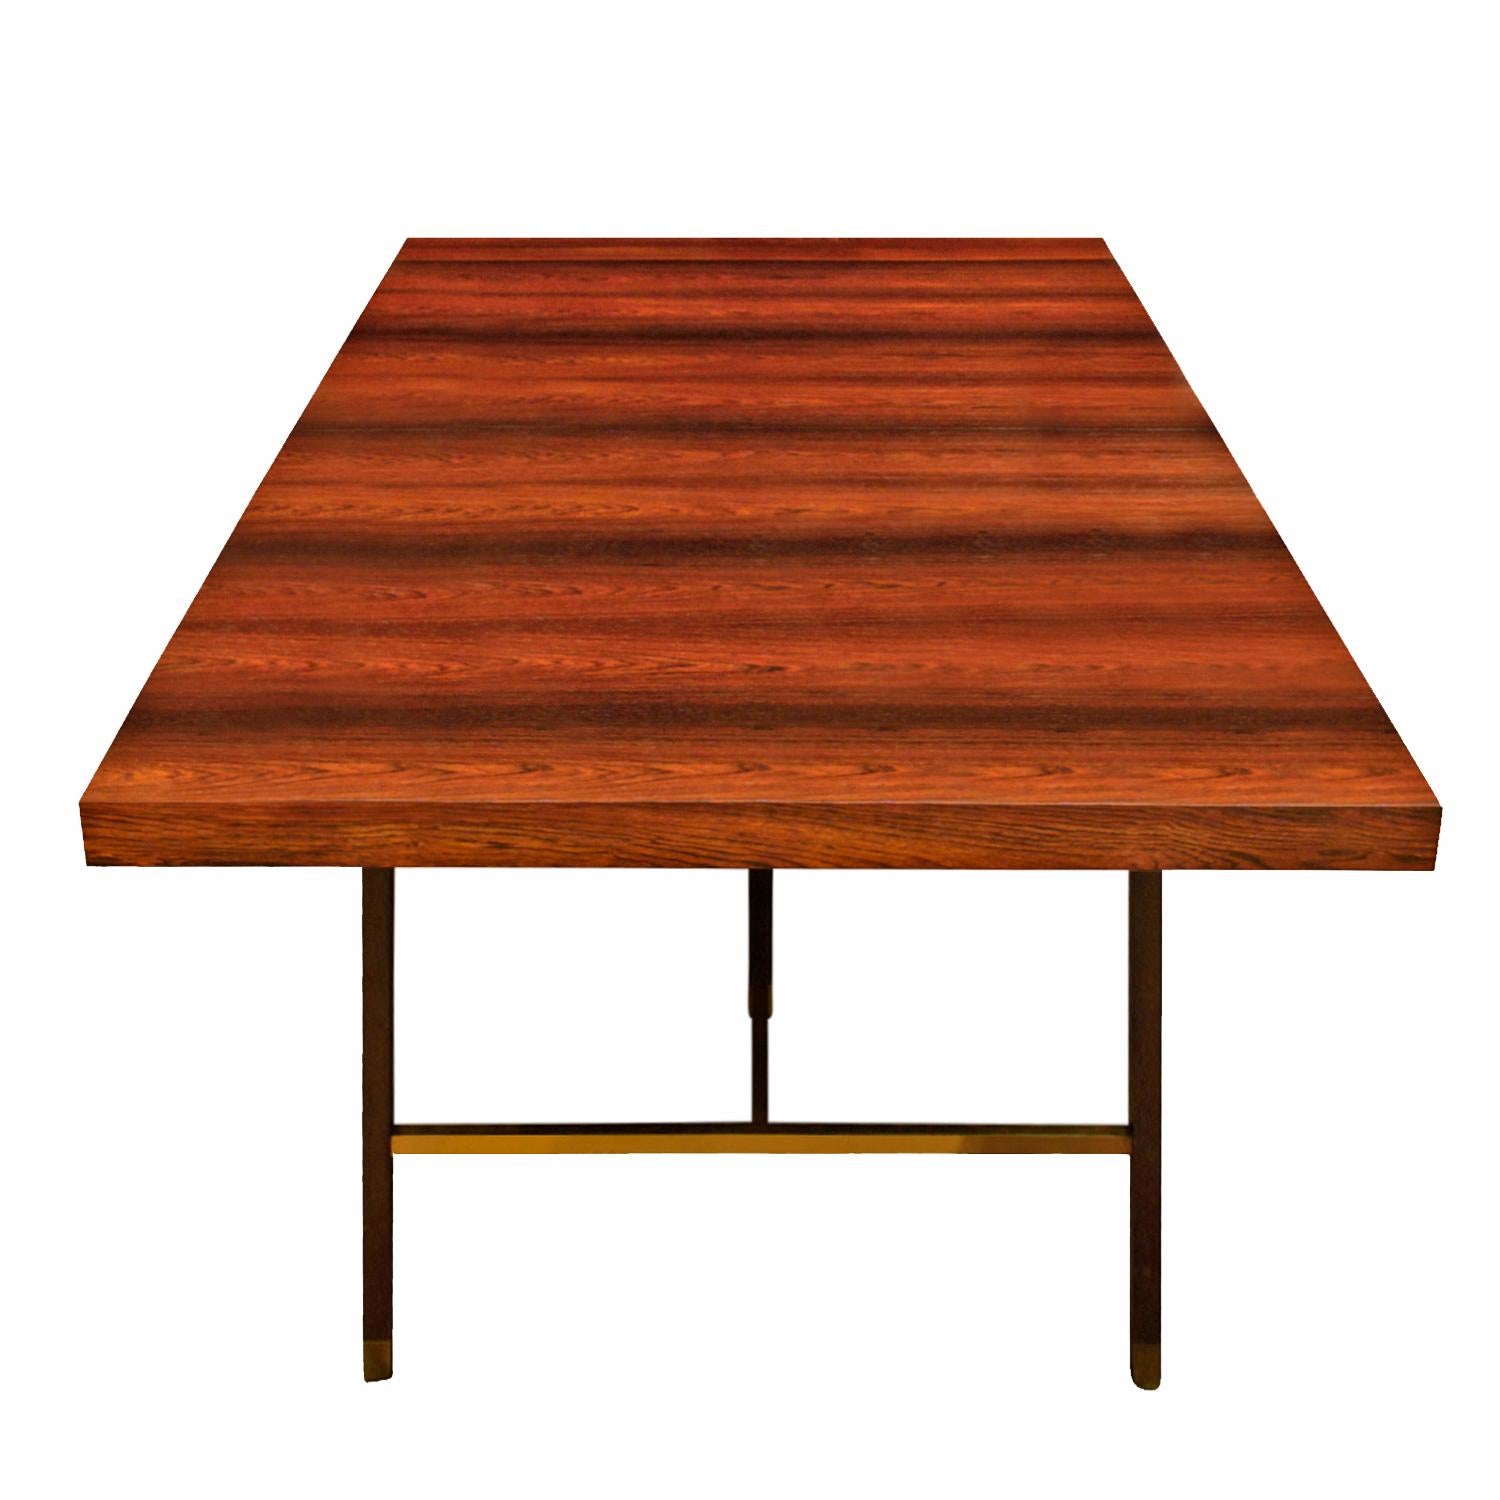 American Harvey Probber Dining Table With 2 Leaves In Brazilian Rosewood 1950s (Signed)